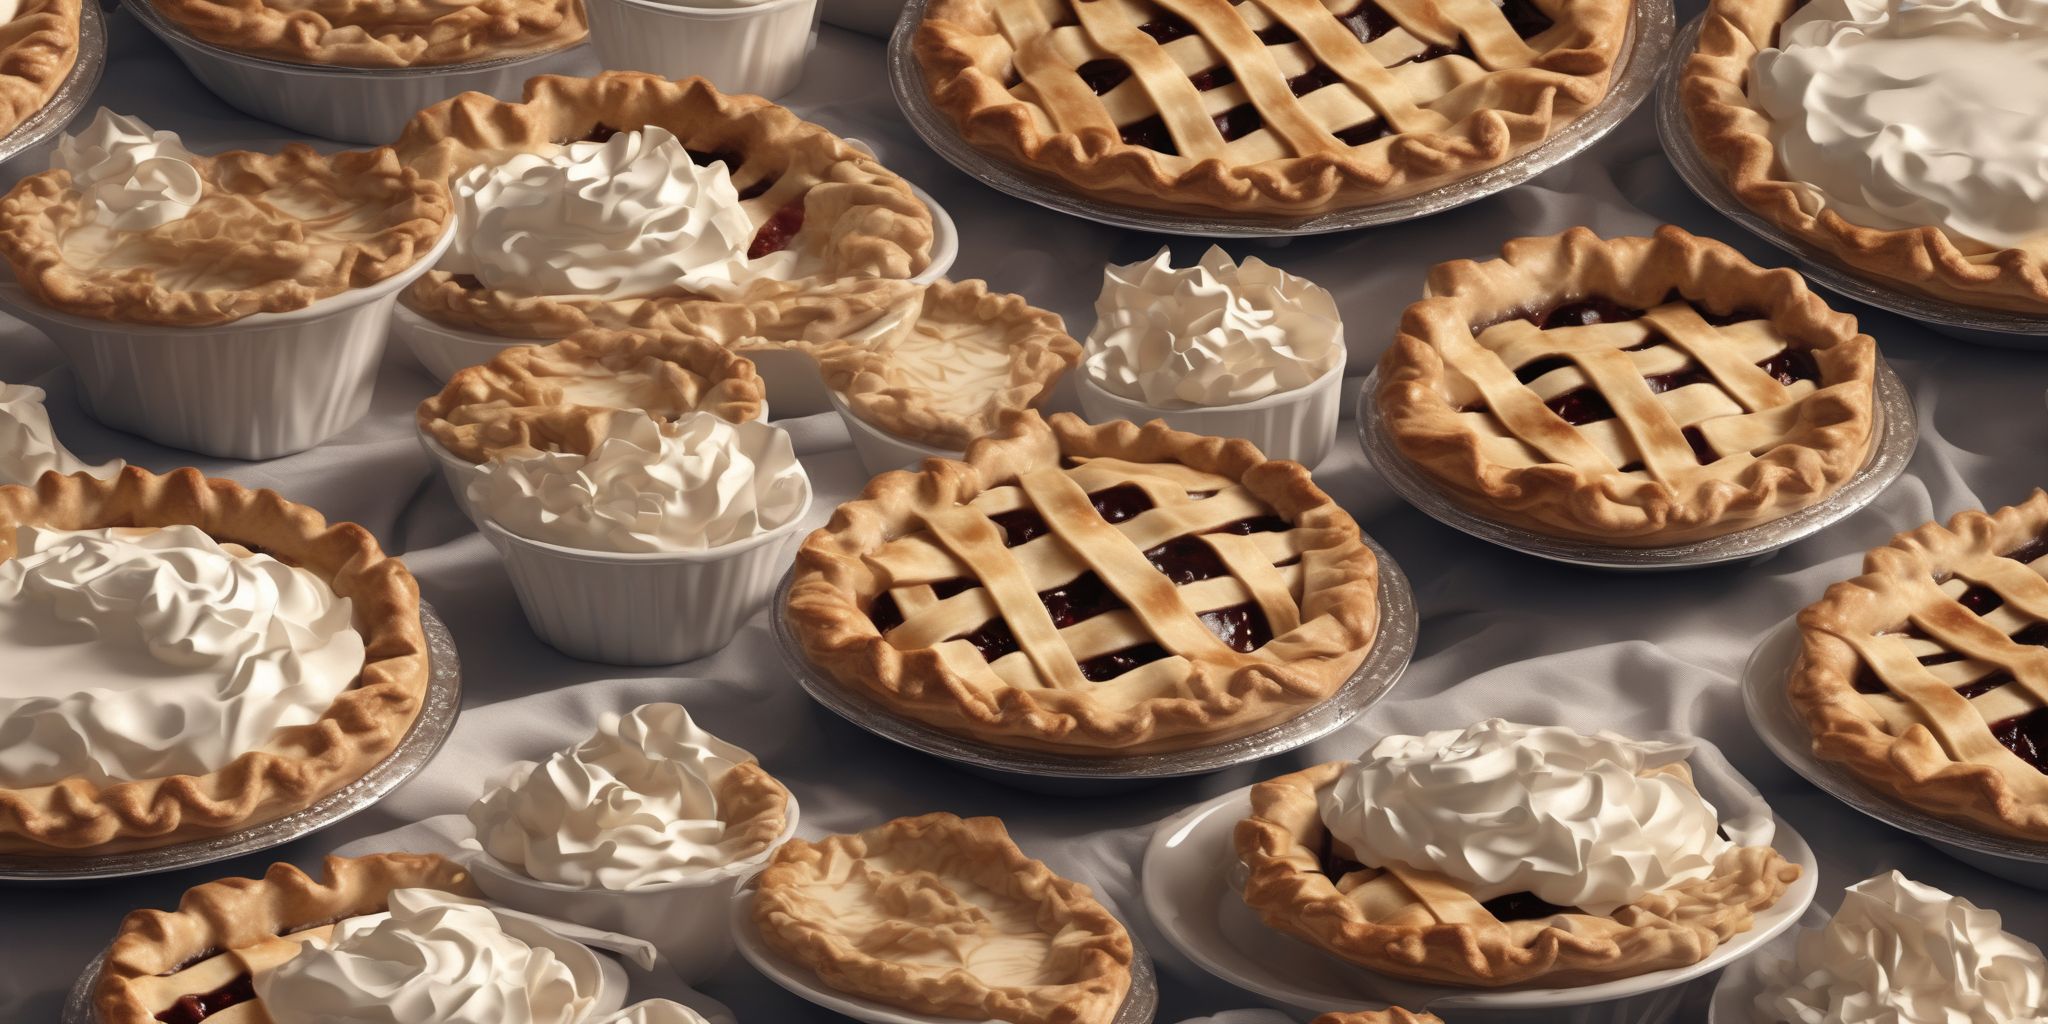 Pie  in realistic, photographic style